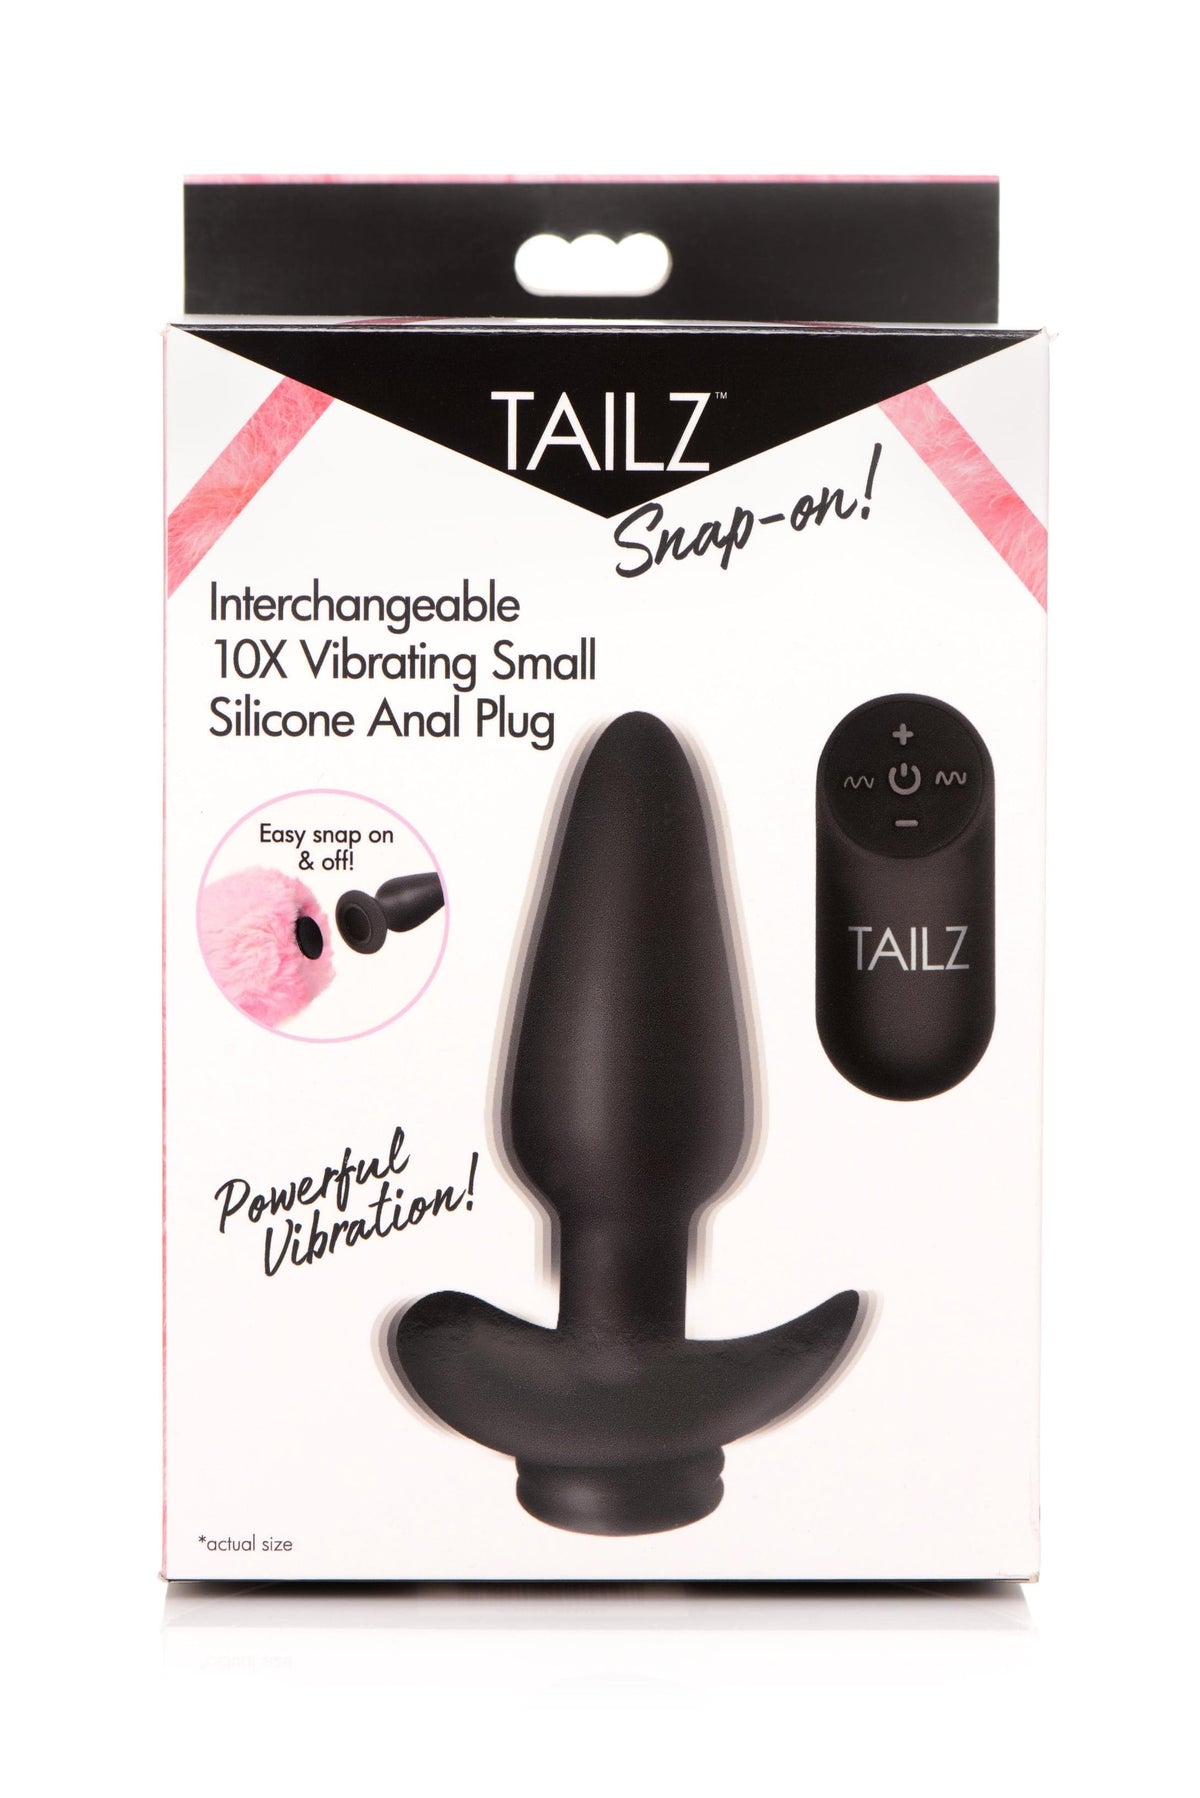 interchangeable 10x vibrating small silicone anal silicone anal plug with remote